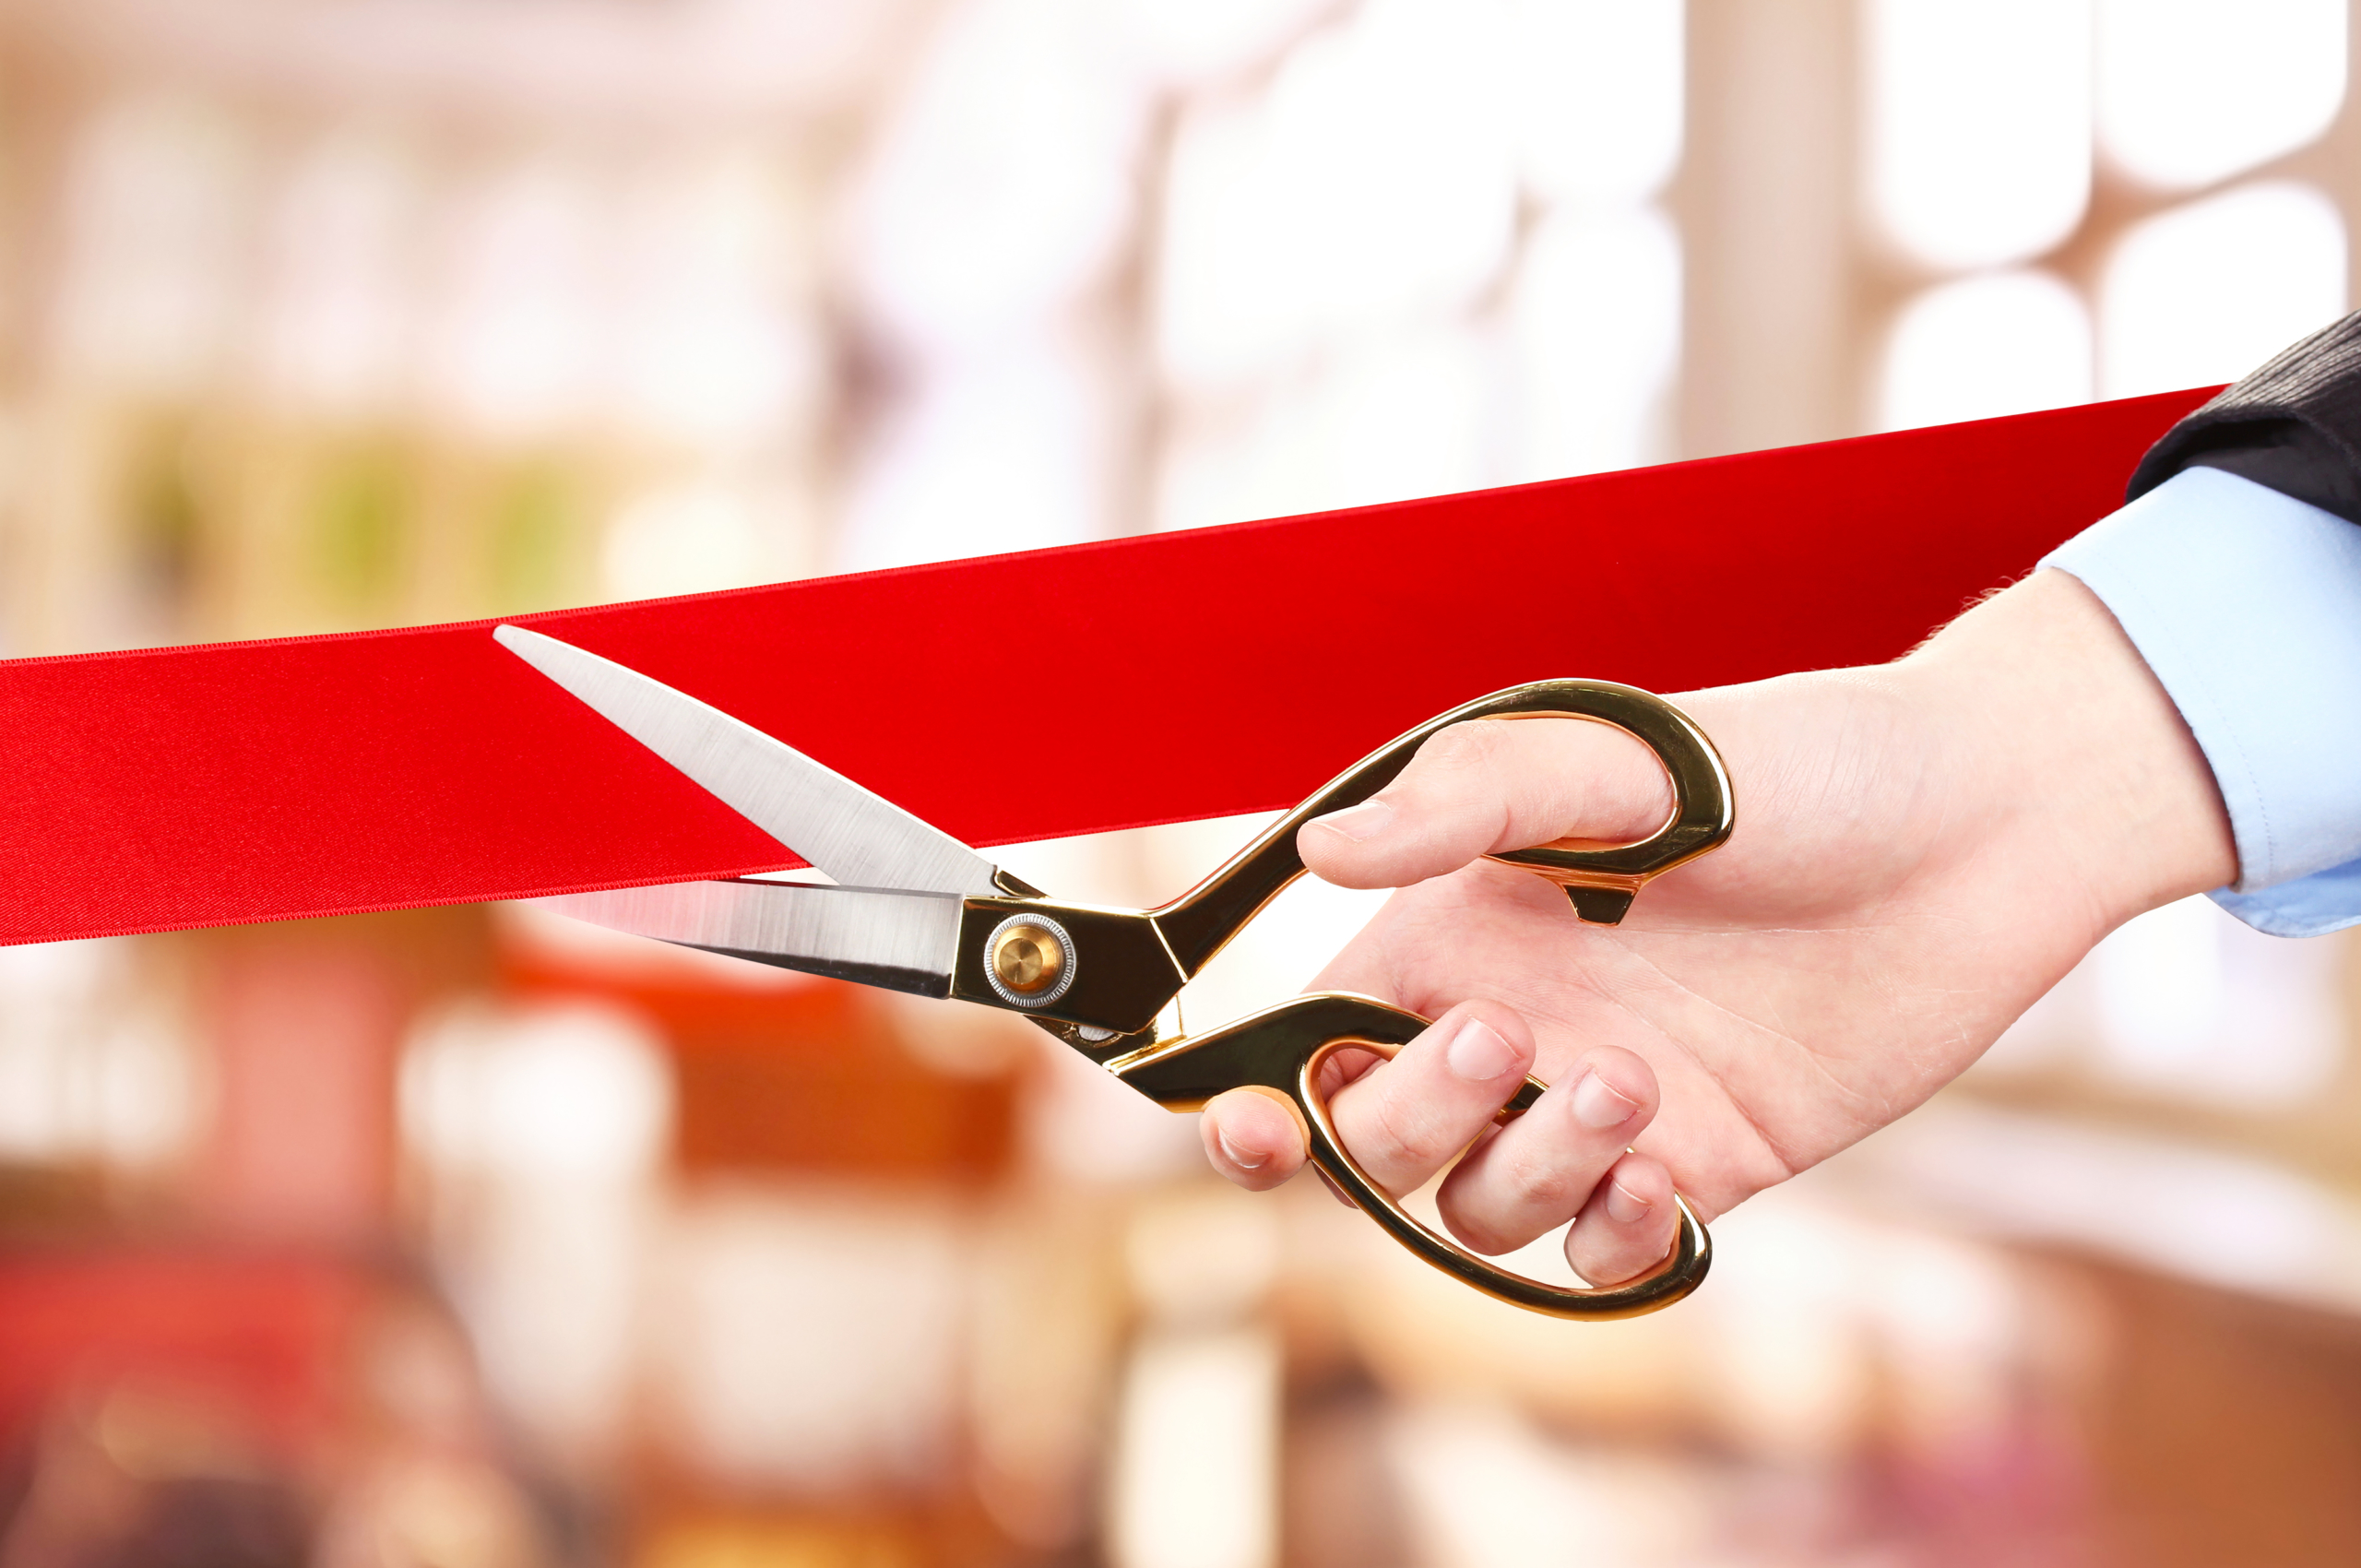 hand cutting red ribbon with scissors